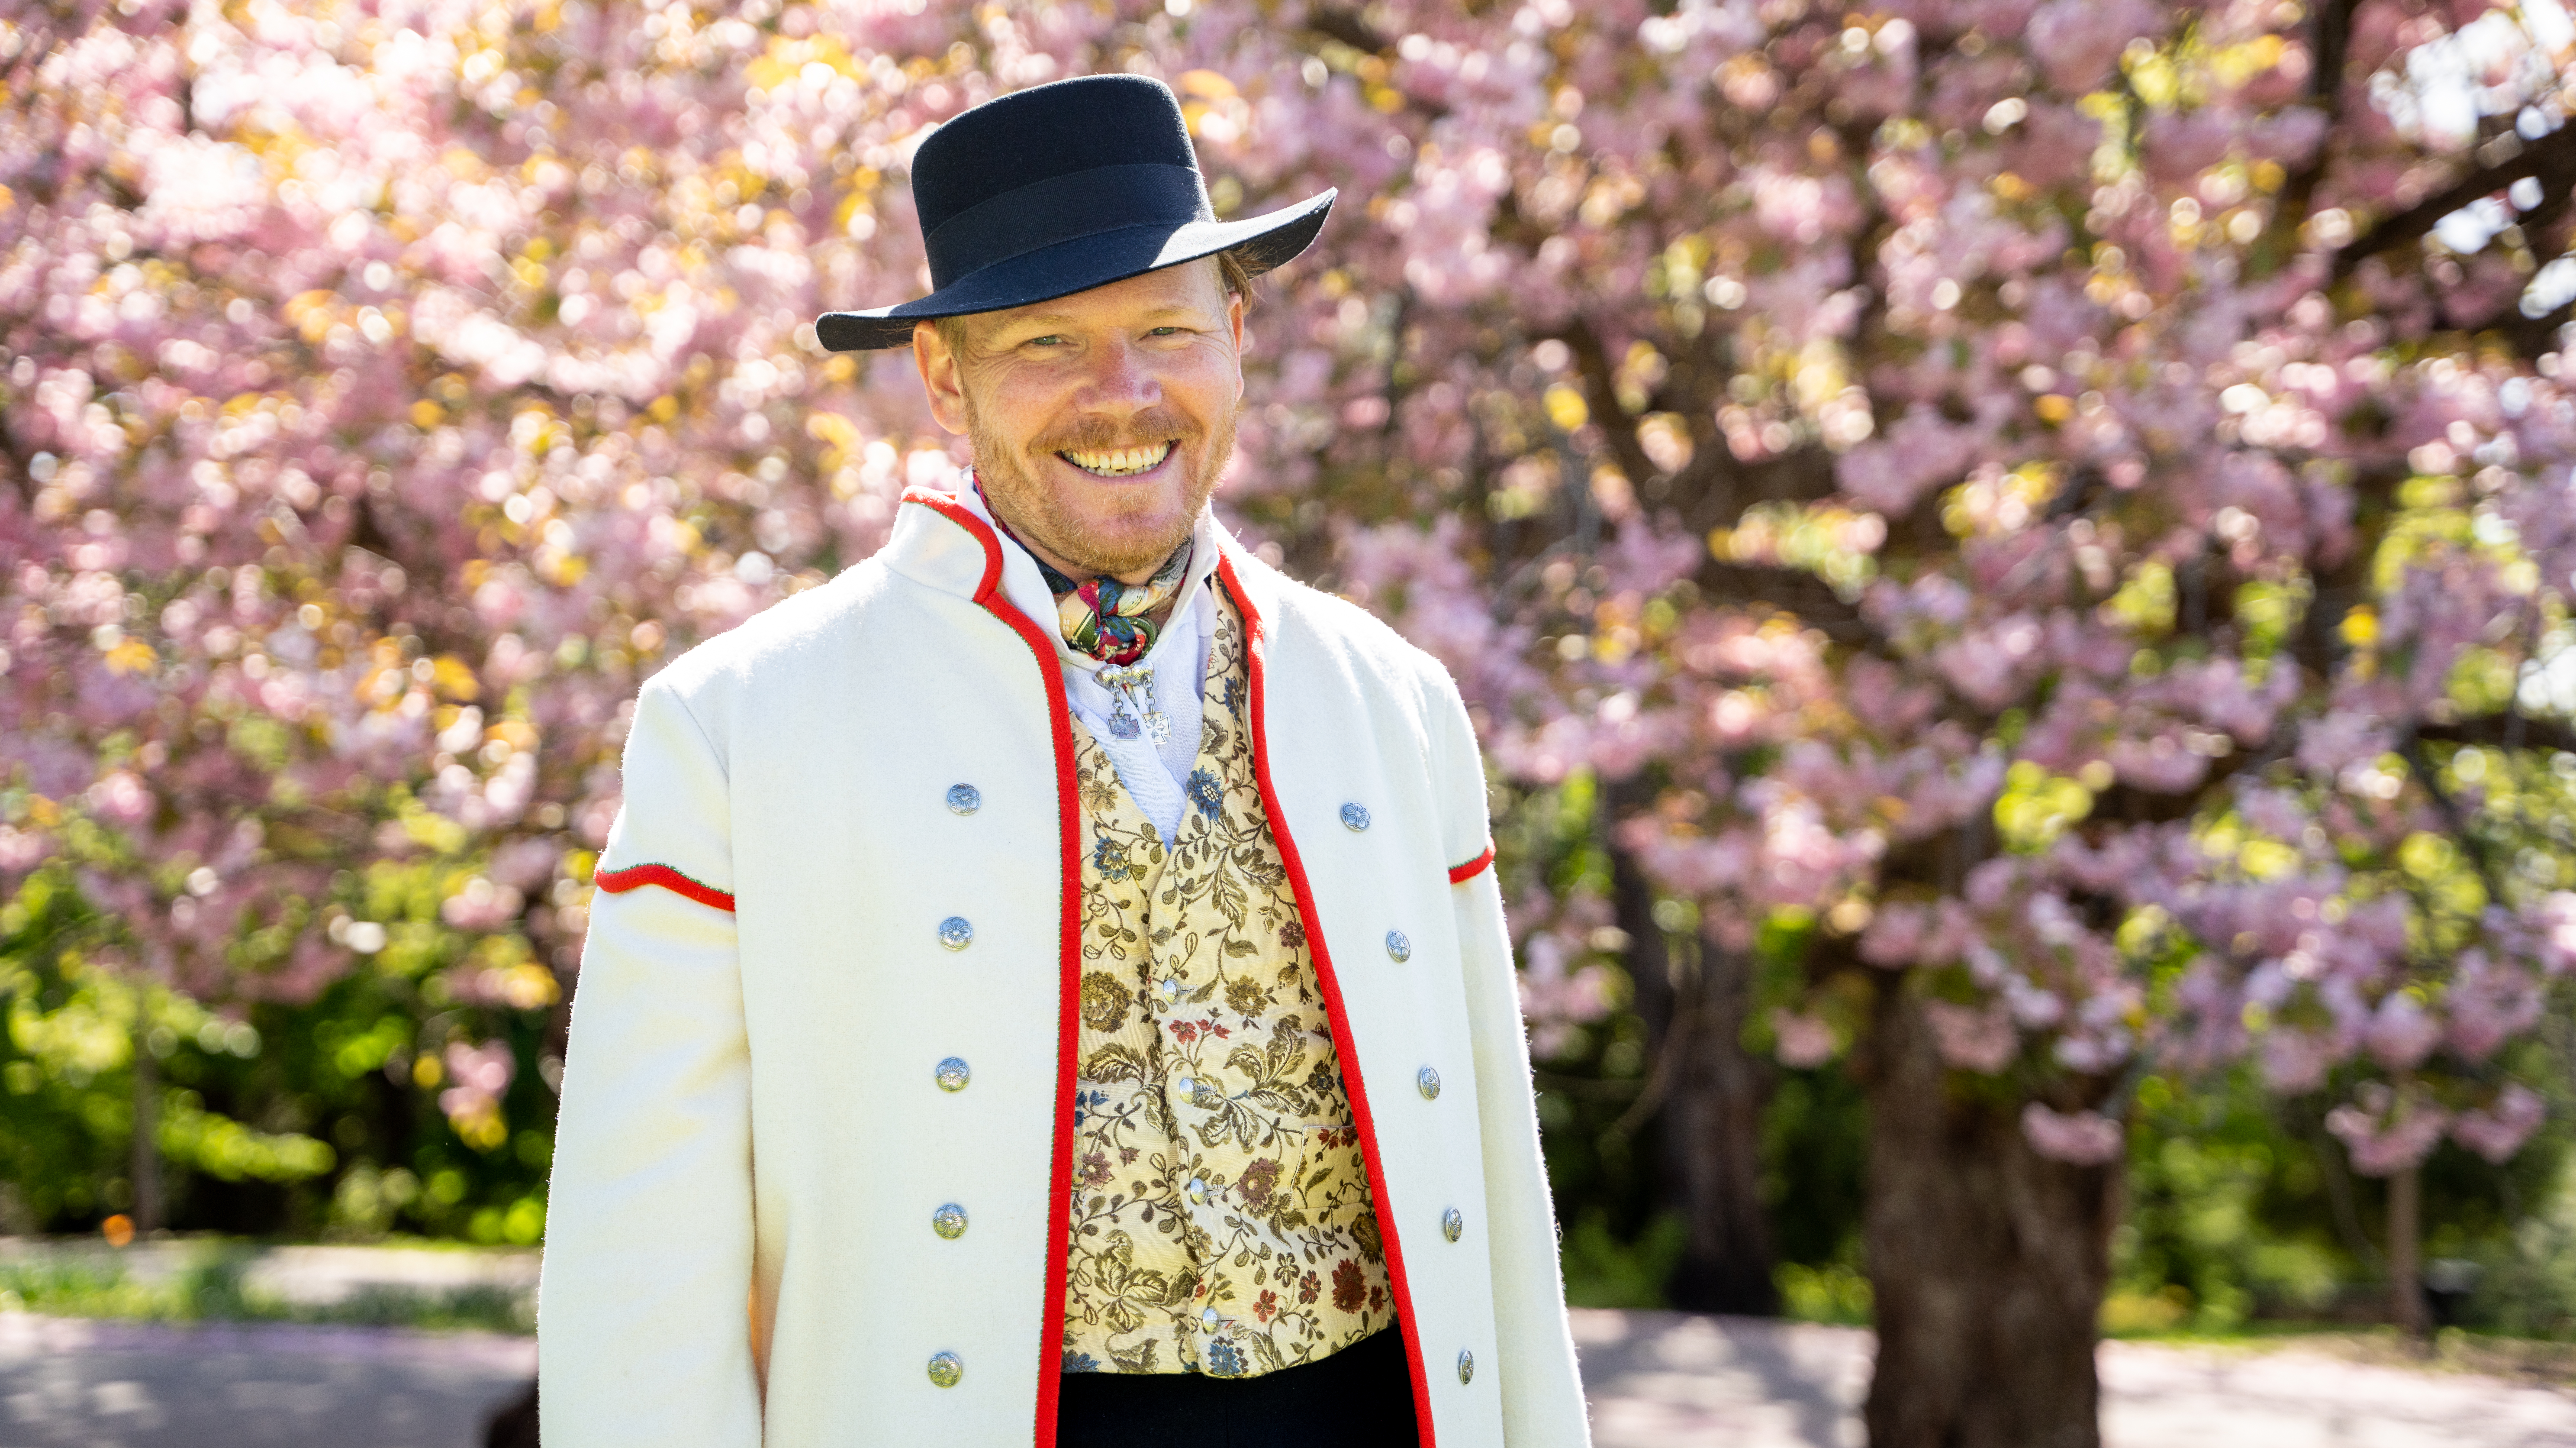 A Norwegian man dressed in the national costume Bunad